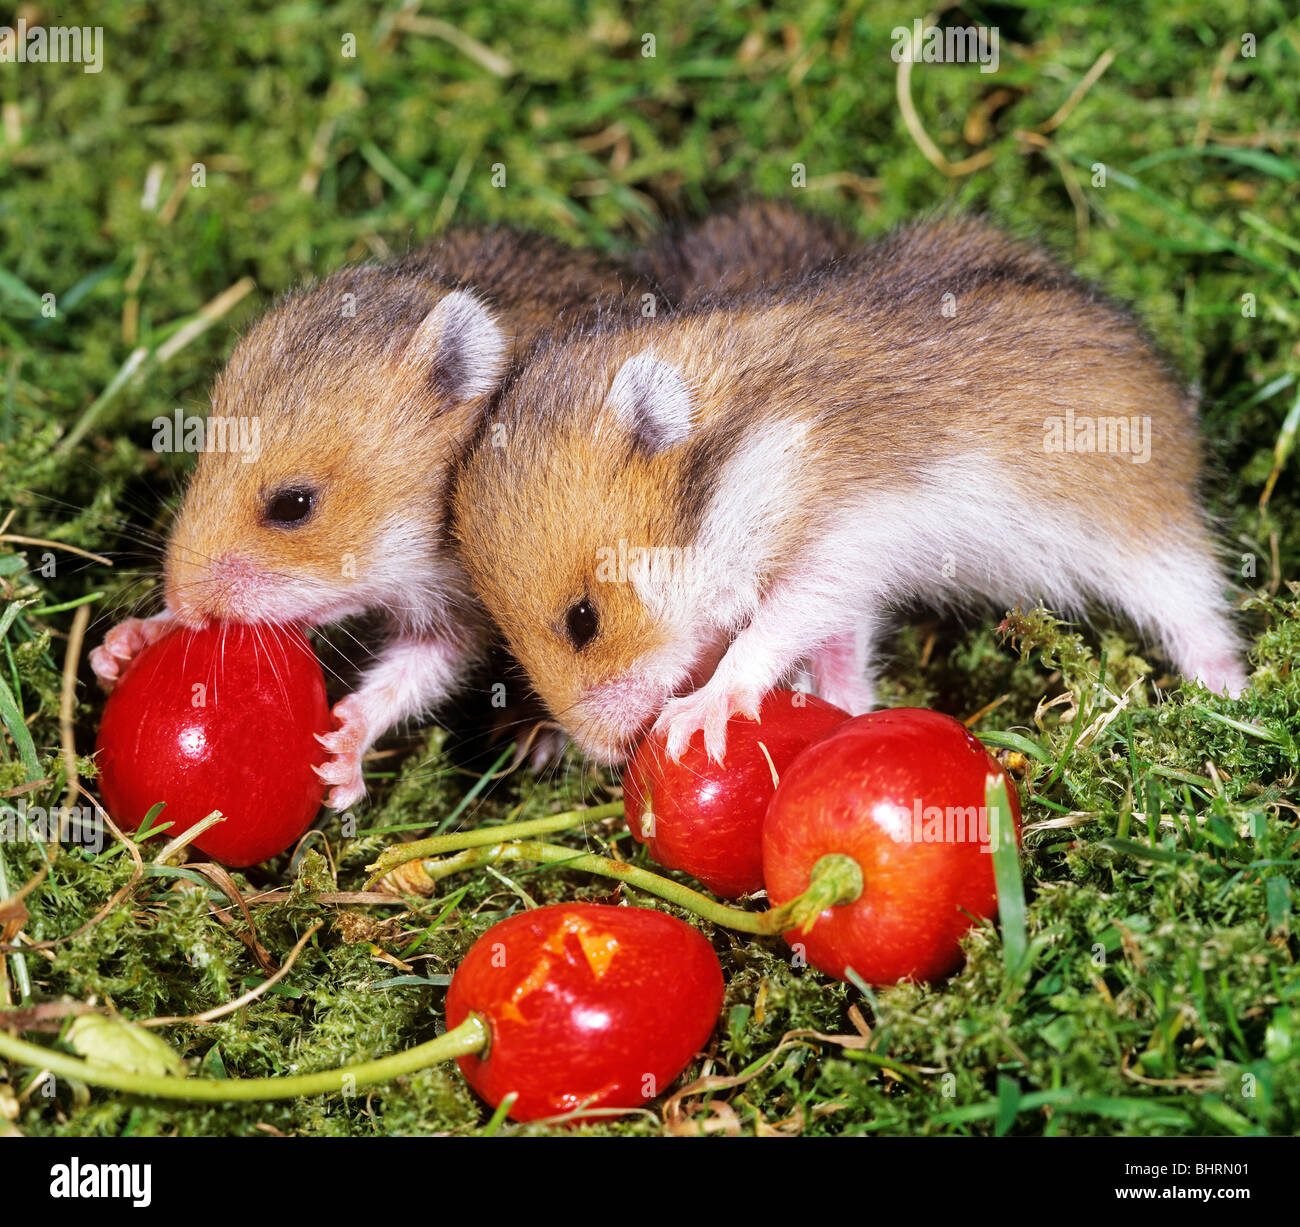 two young Golden Hamsters at cherries / Mesocricetus auratus Stock Photo